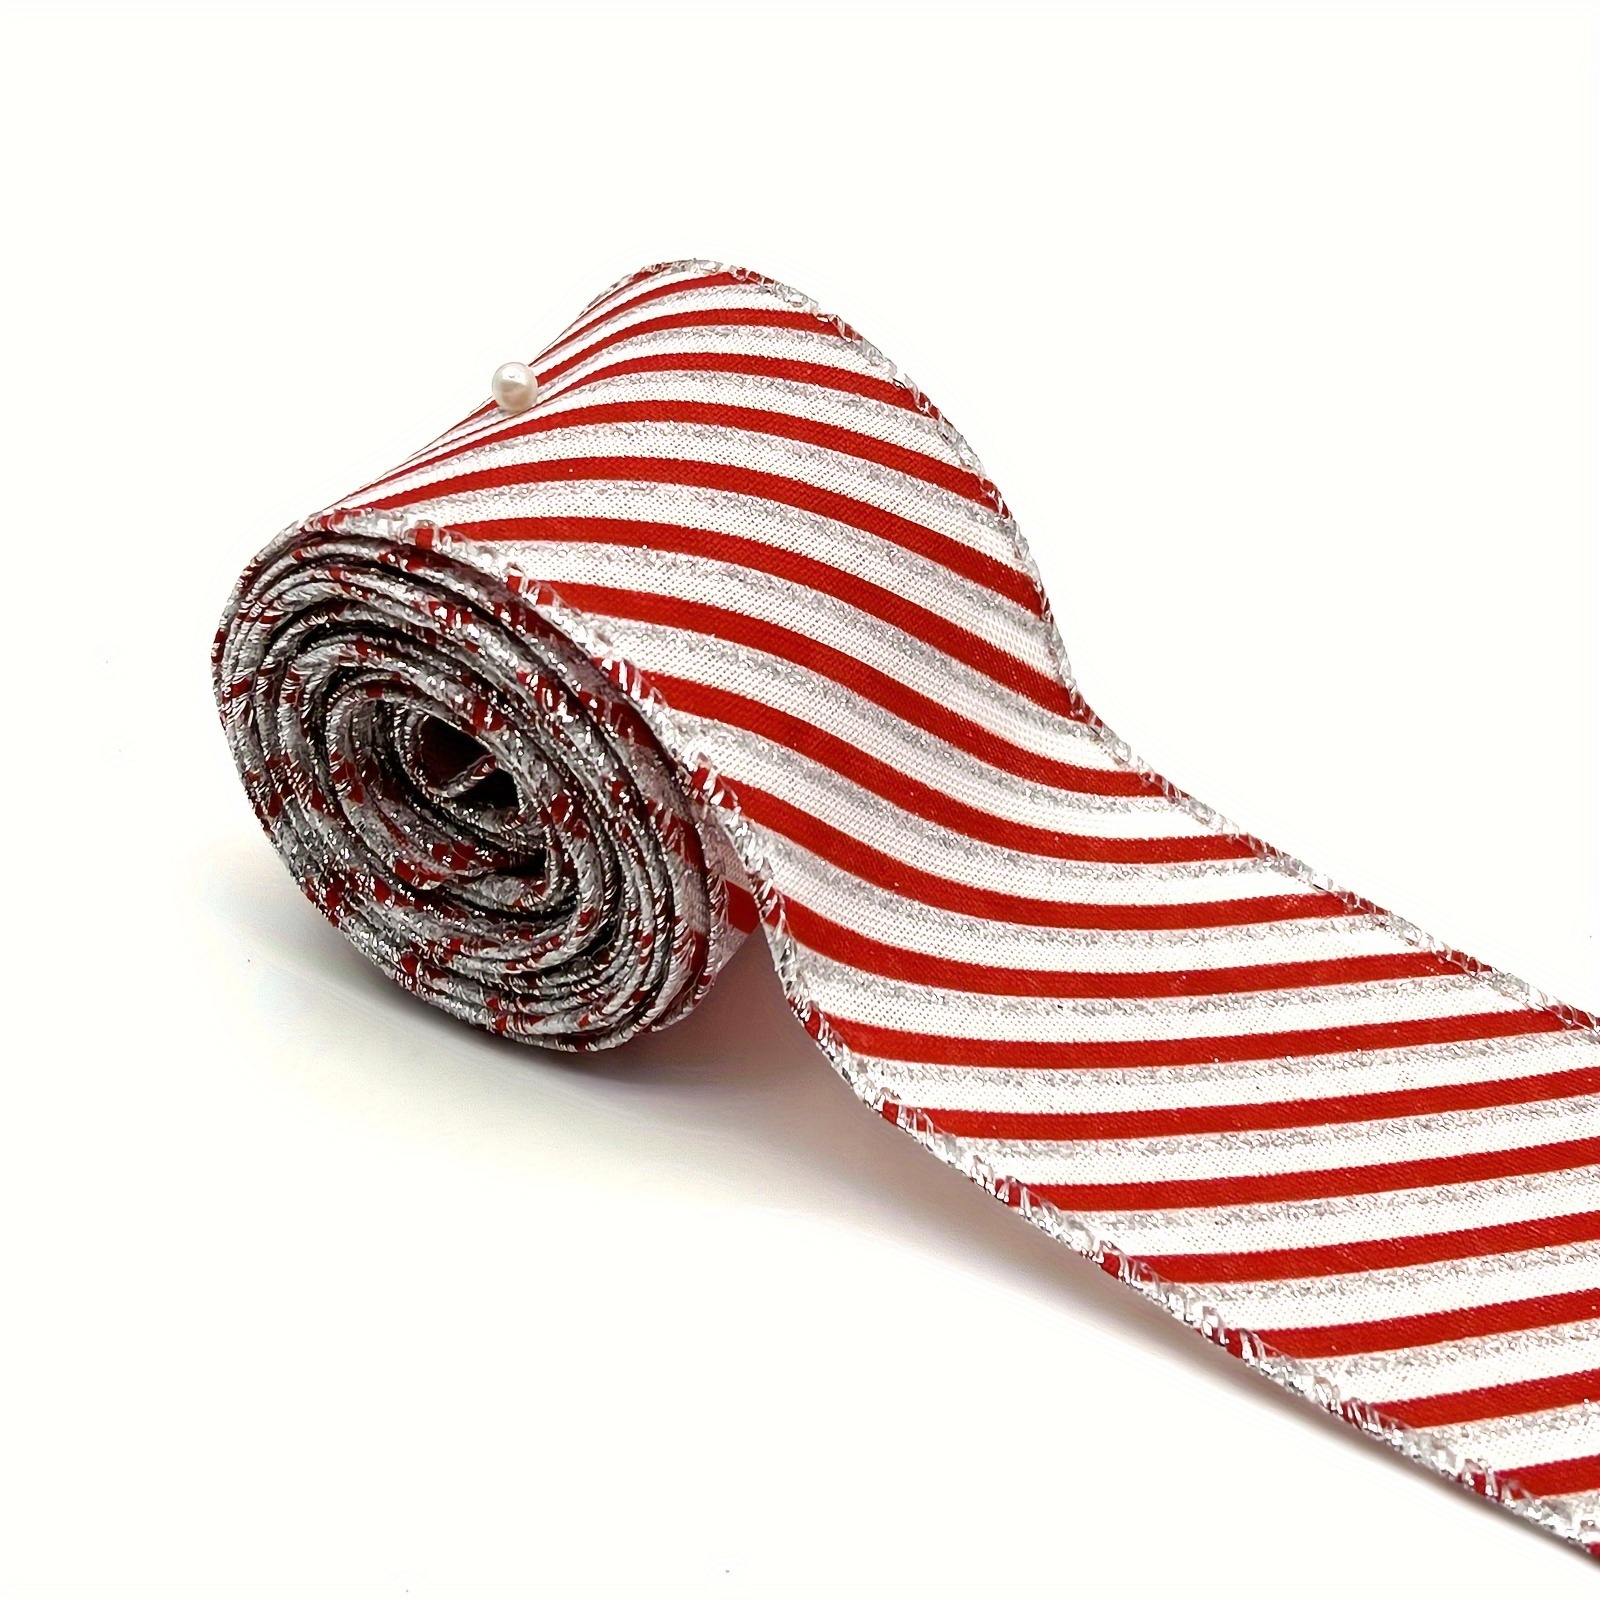 50 Yards Christmas Striped Ribbon Grosgrain Fabric Ribbon Red White and  Black Candy Cane Craft Wrapping Ribbons Roll for Wraps Embellishments Party